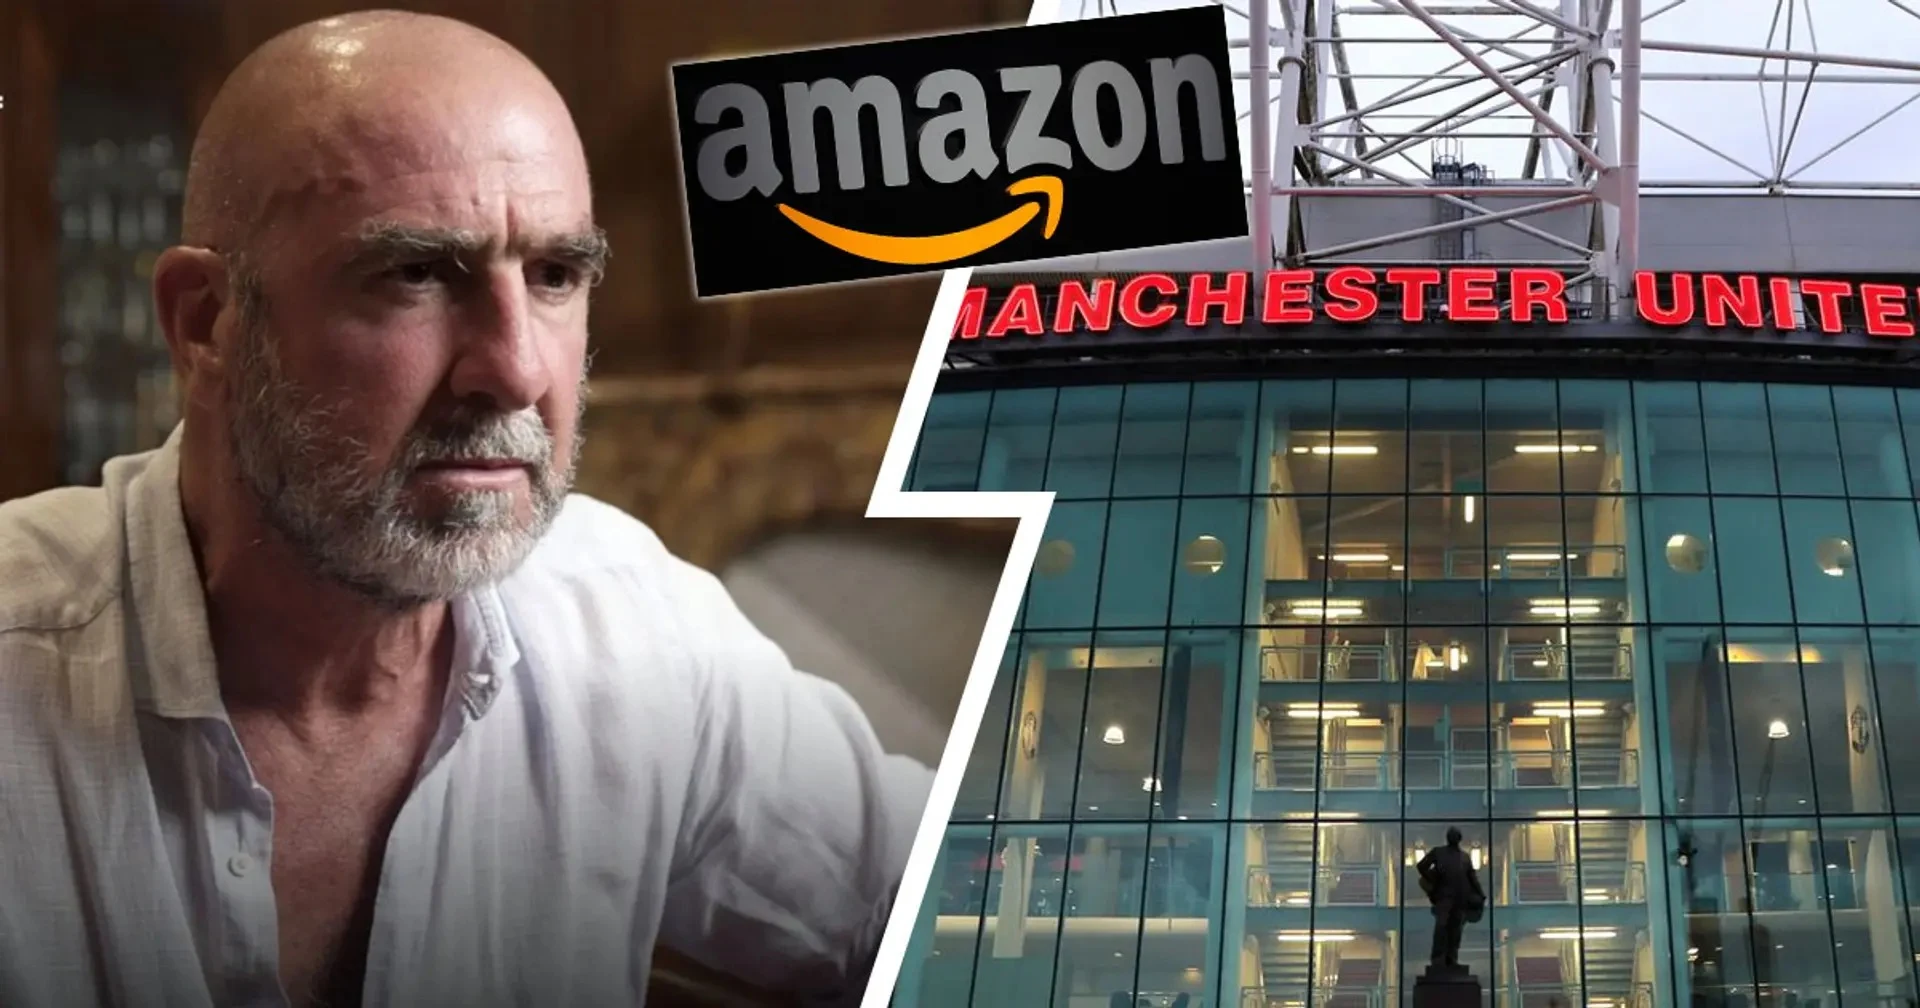 'Don't call it Nestle or Amazon': Cantona vows to stop supporting United if Old Trafford is renamed